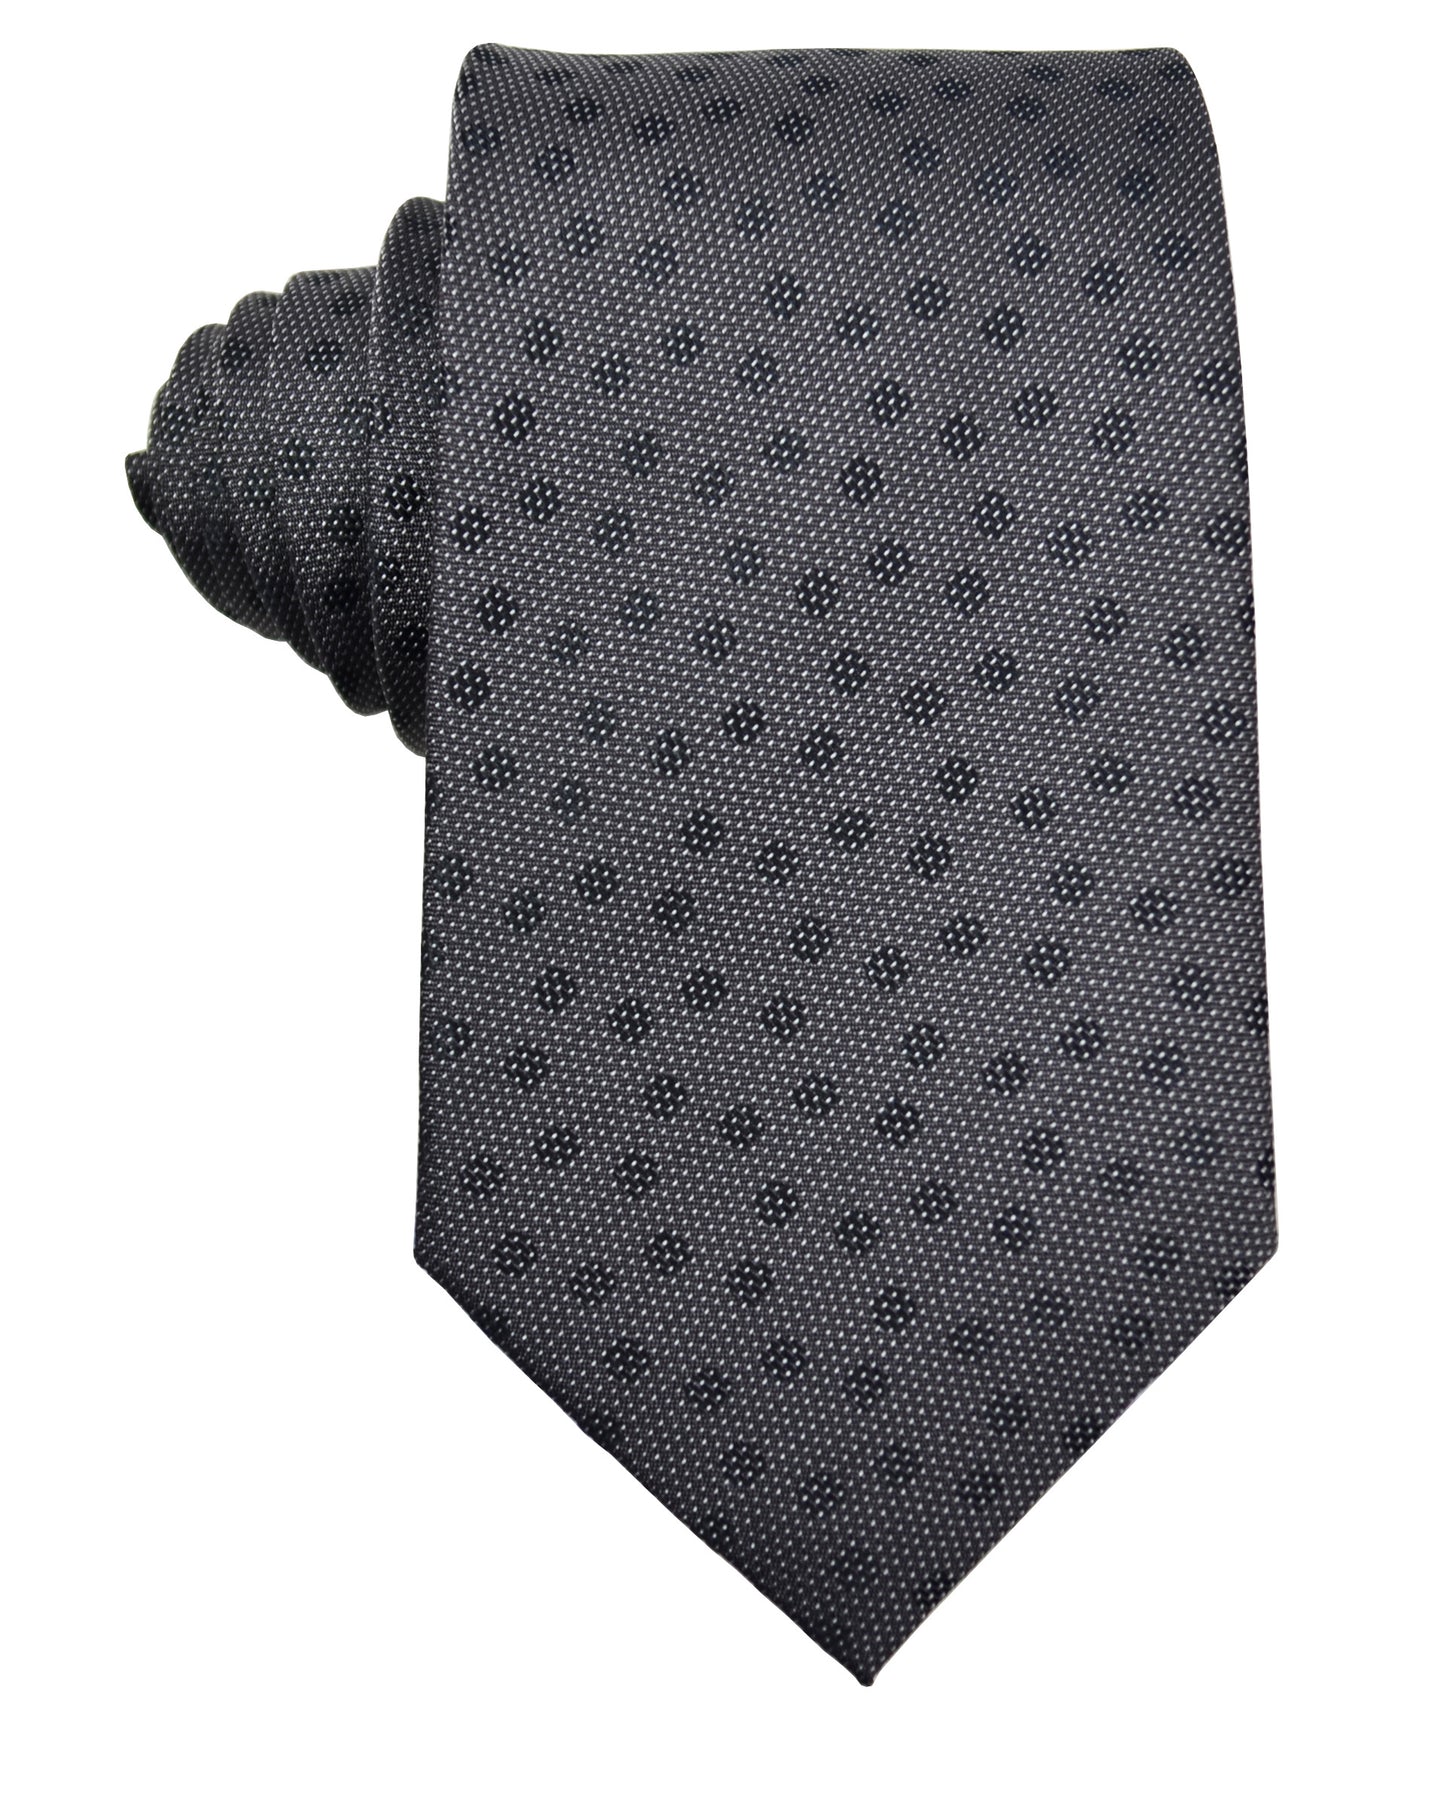 Charcoal Polka Dot Silk Tie and Pocket Square | Paul Malone